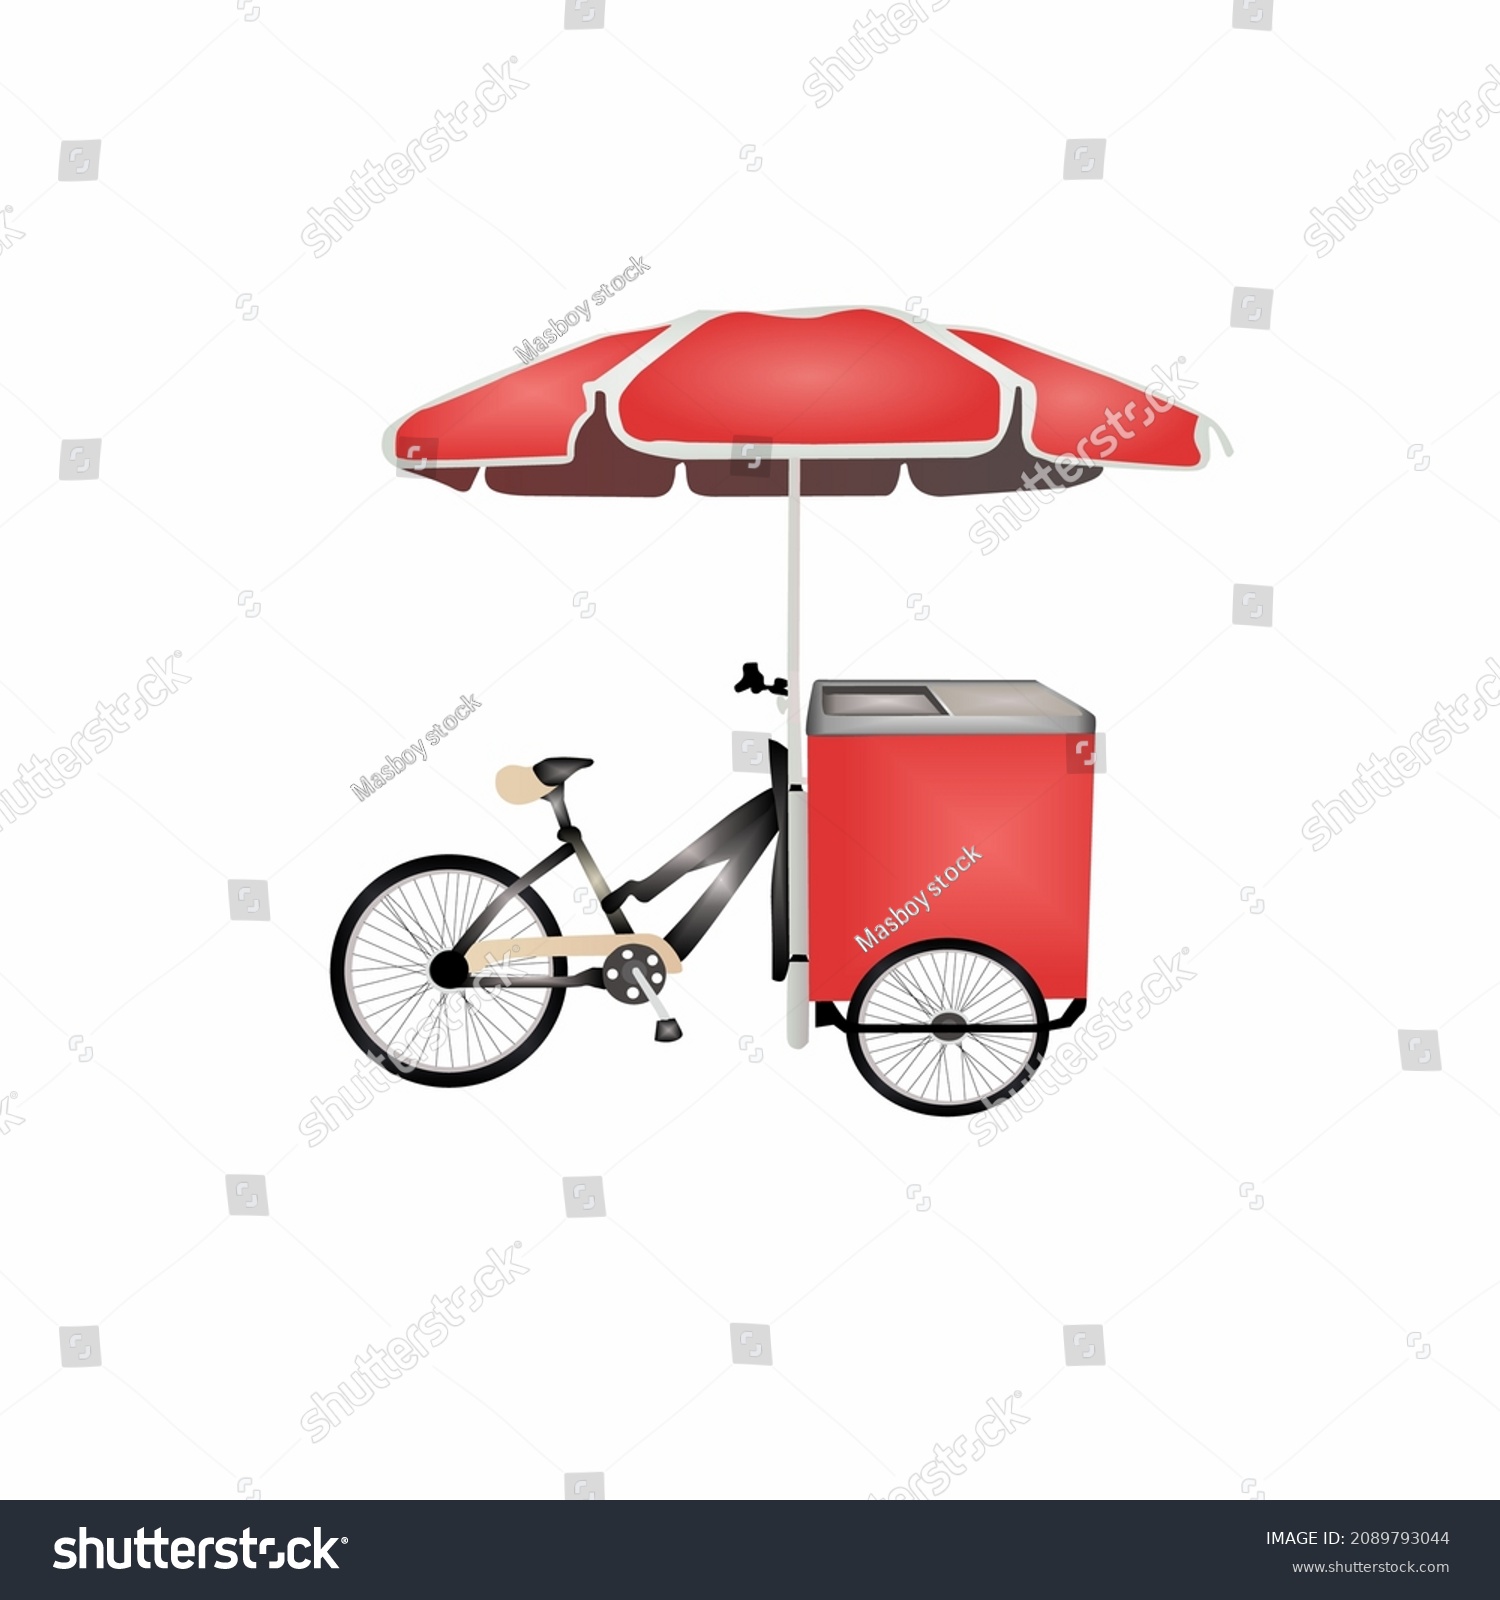 SVG of Ice cream bicycle cart design, with red umbrella sunshade svg